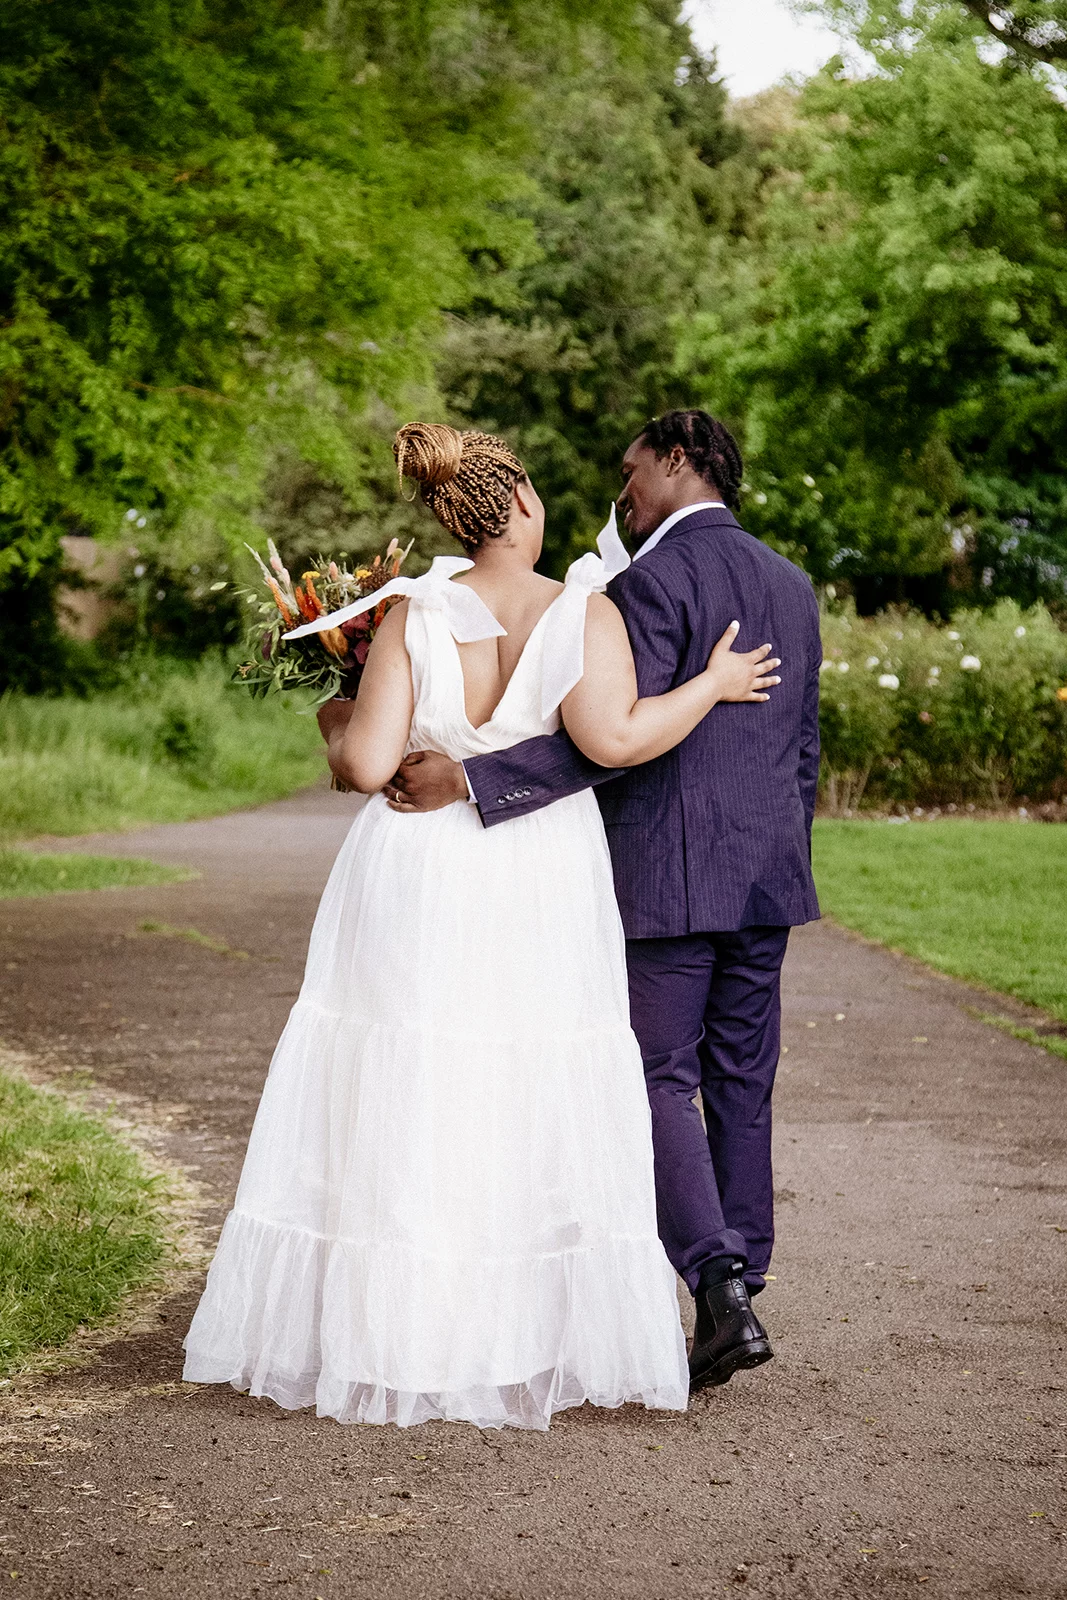 A young Black bride and groom walk outside, their arms around each other's backs